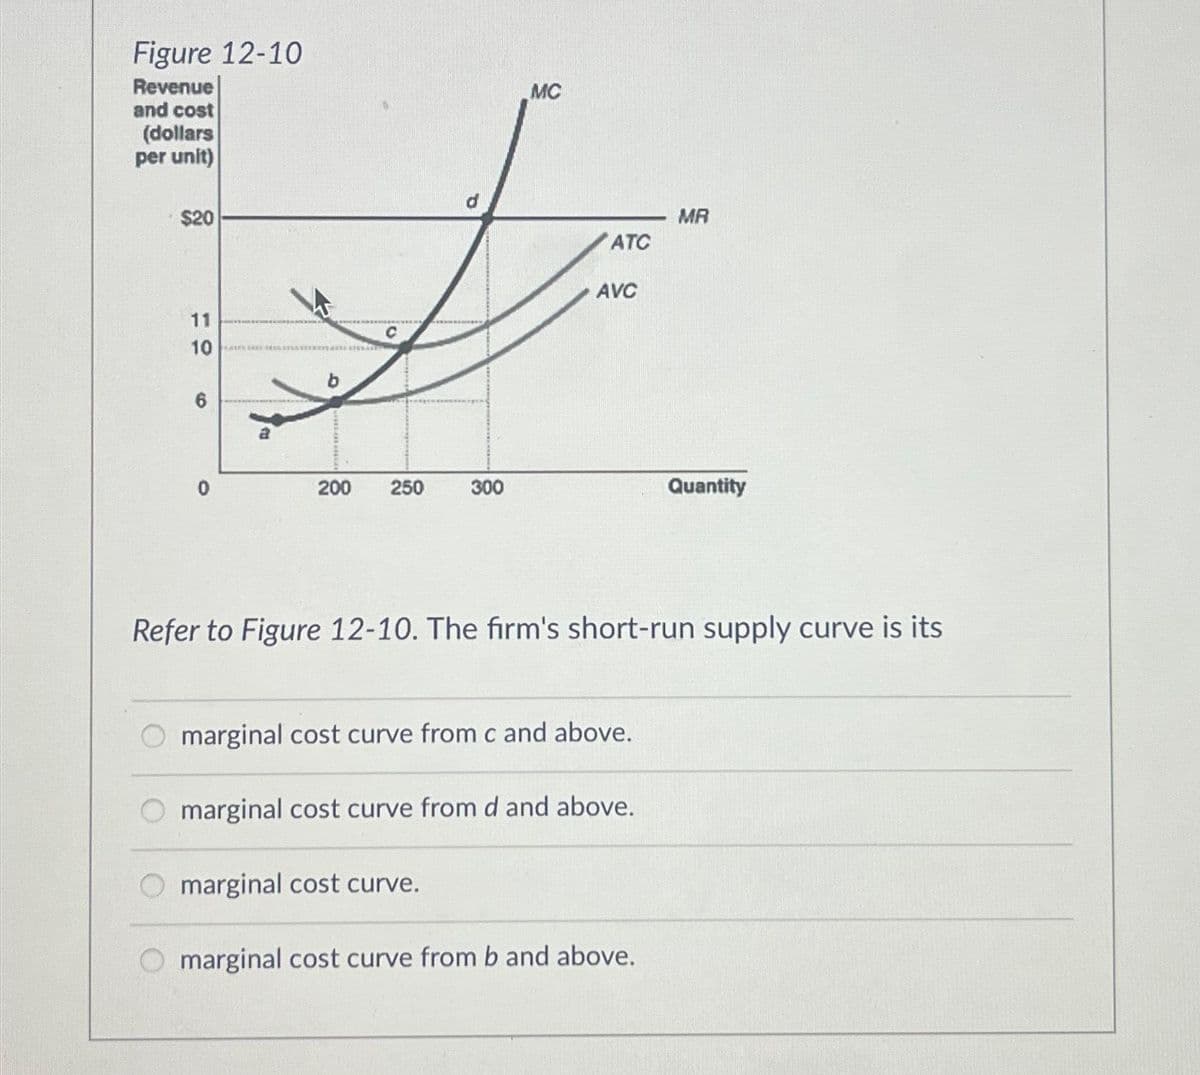 Figure 12-10
Revenue
and cost
(dollars
per unit)
$20
11
10
6
DE SE
C
C
200 250
300
MC
ATC
AVC
marginal cost curve from c and above.
Refer to Figure 12-10. The firm's short-run supply curve is its
marginal cost curve from d and above.
MR
O marginal cost curve.
marginal cost curve from b and above.
Quantity